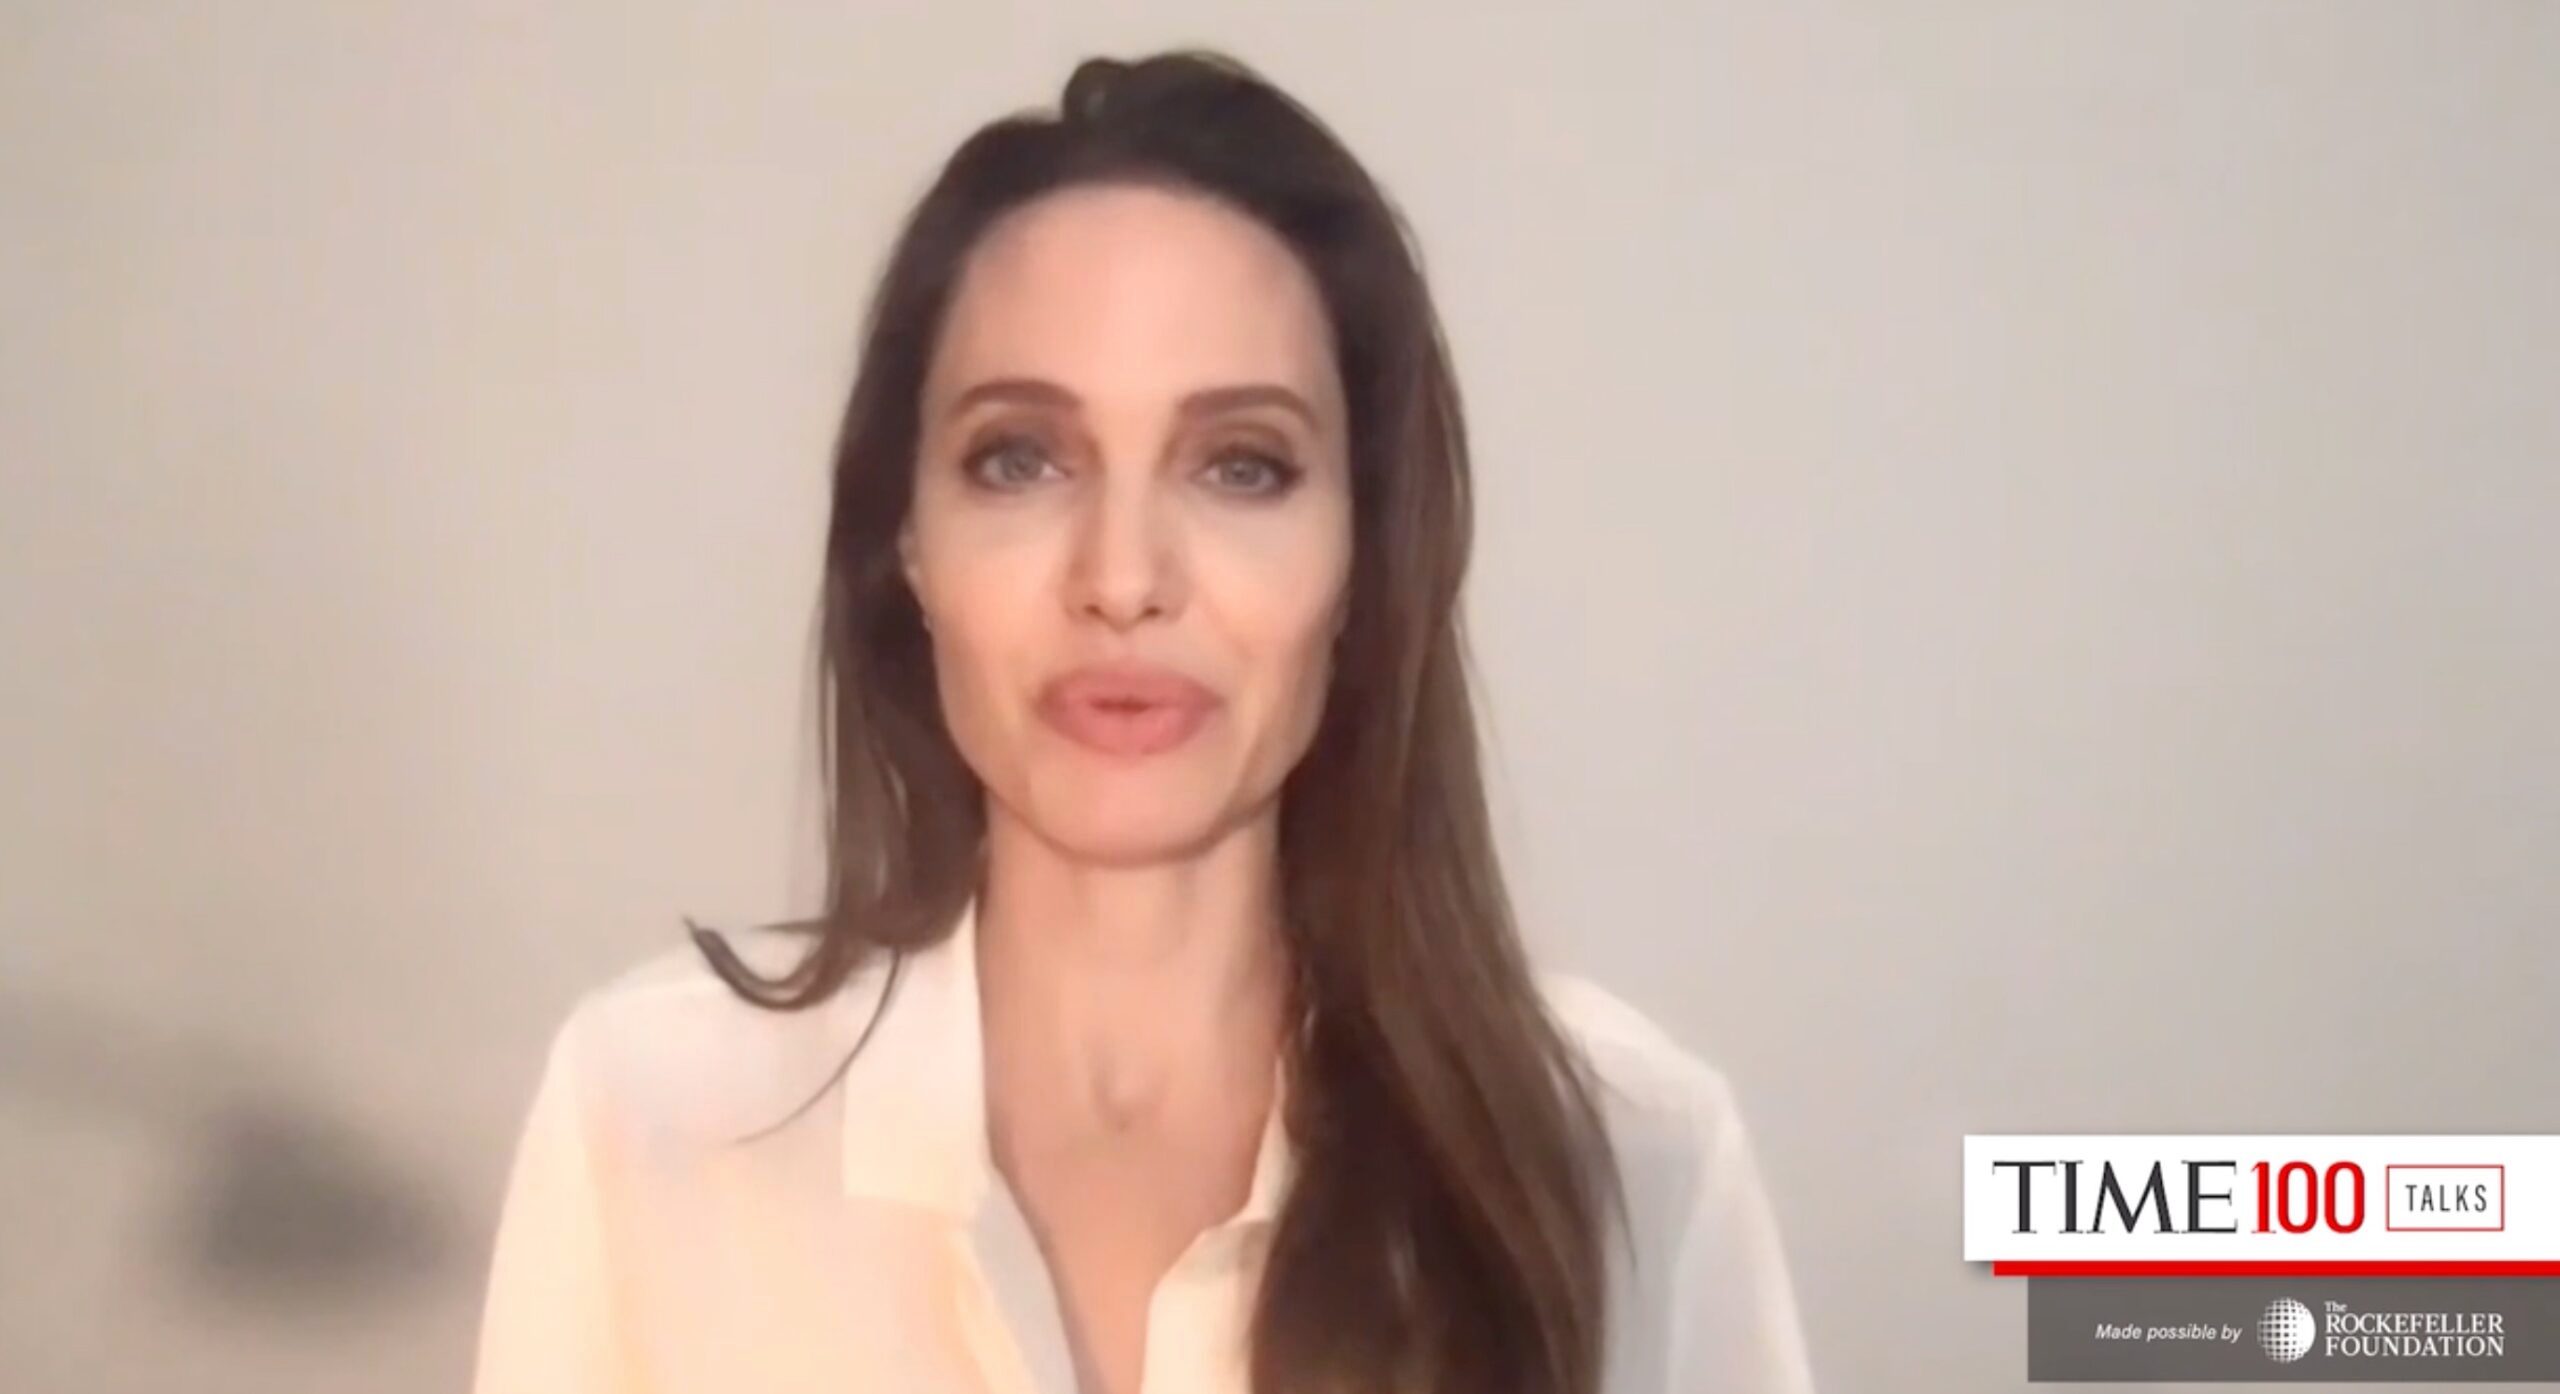 Angelina Jolie on pandemic: ‘Time for outrage, grand change across the world’